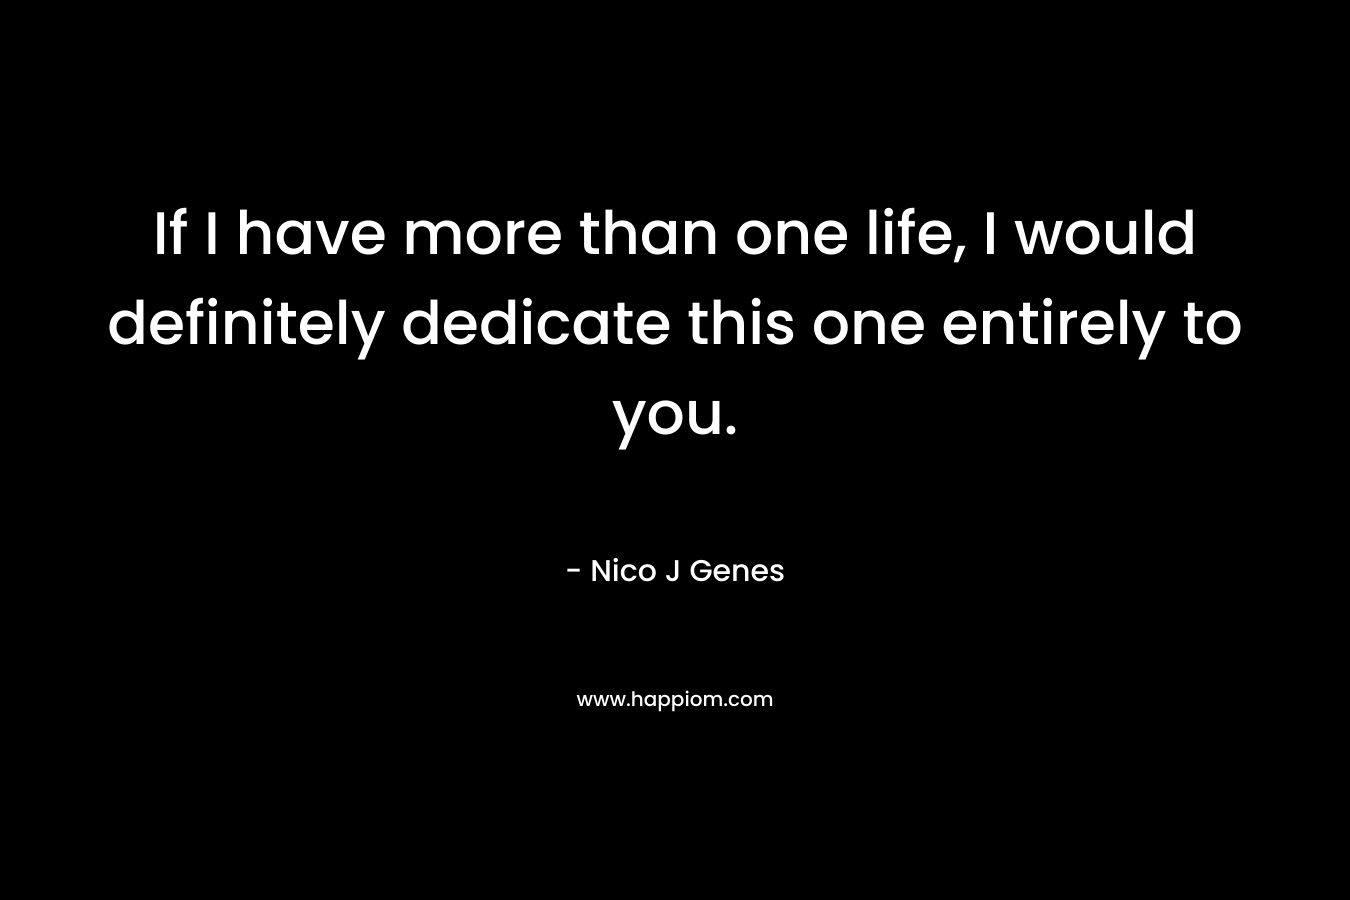 If I have more than one life, I would definitely dedicate this one entirely to you. – Nico J Genes